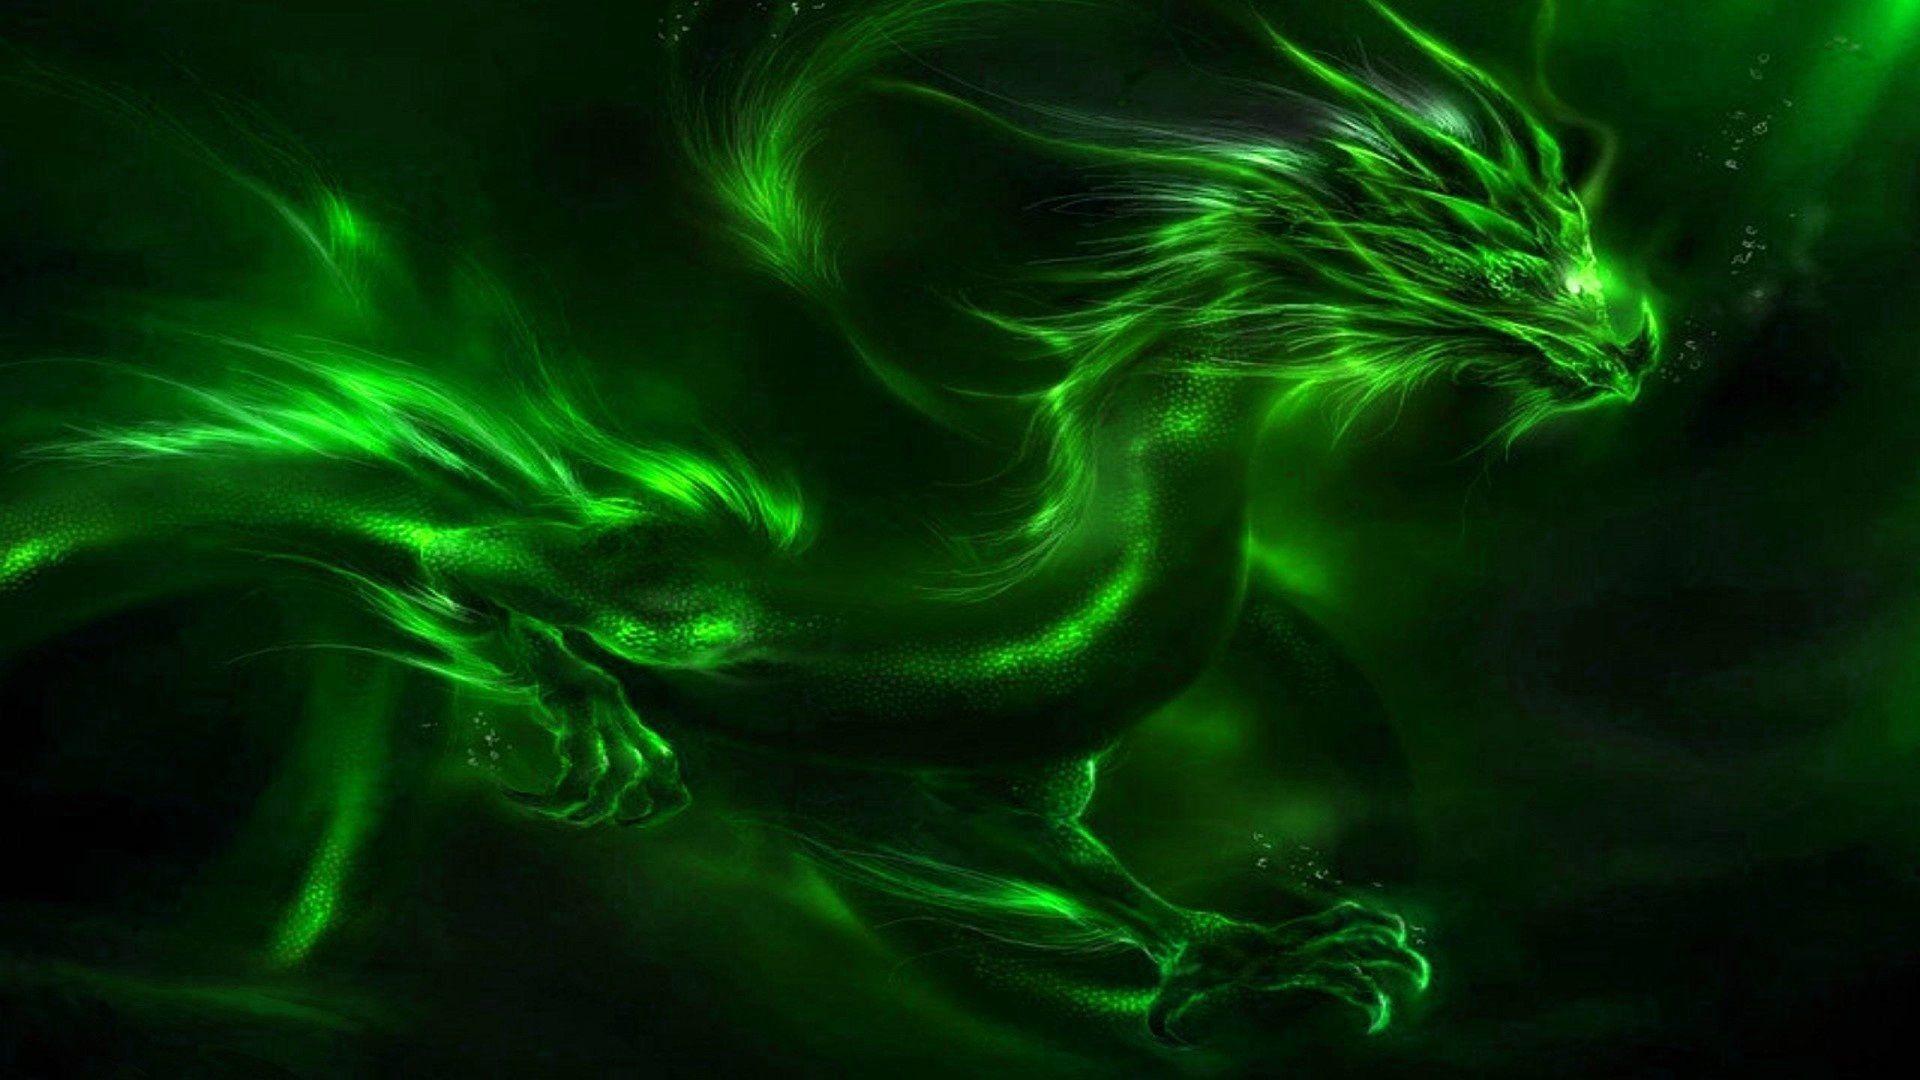 Green and Black Dragon Wallpapers - Top Free Green and Black Dragon ...